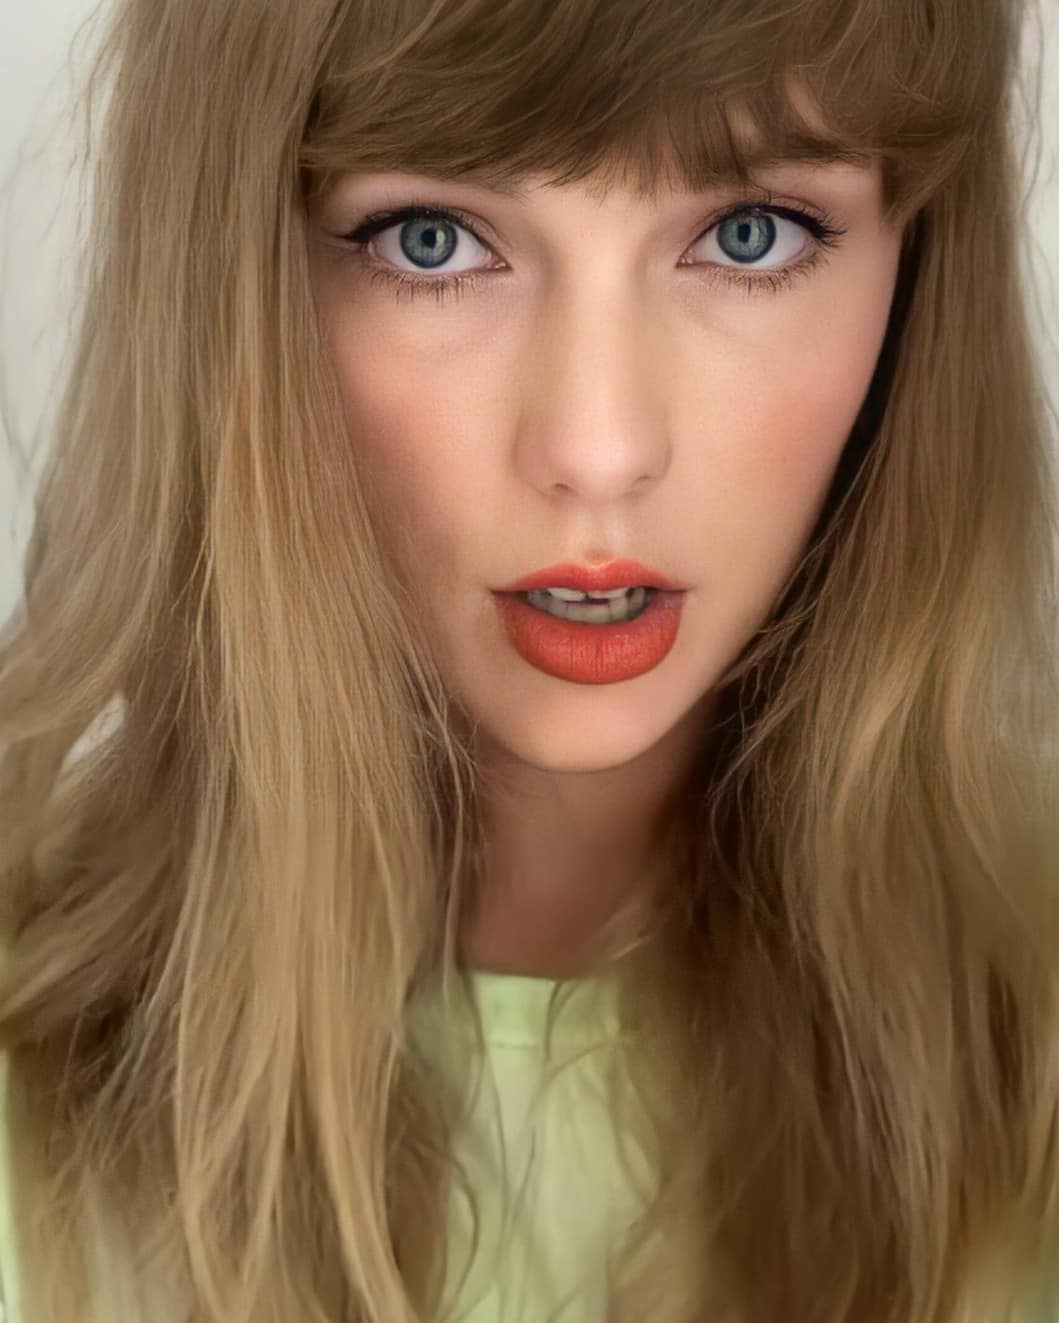 Taylor S Lips Are Perfect For Blowjob Scrolller